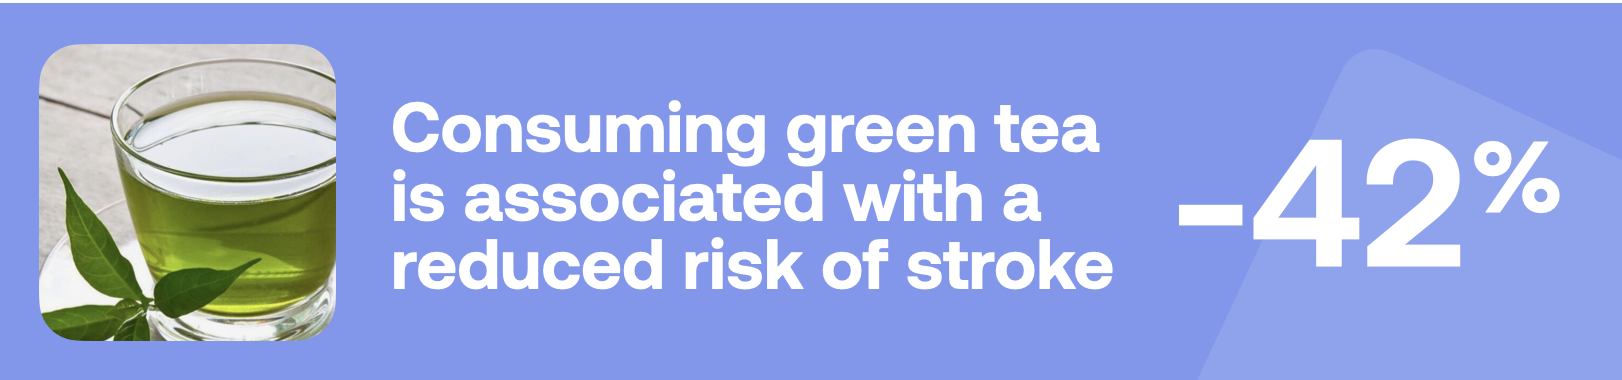 Consuming green tea is associated with a reduced risk of stroke -42%